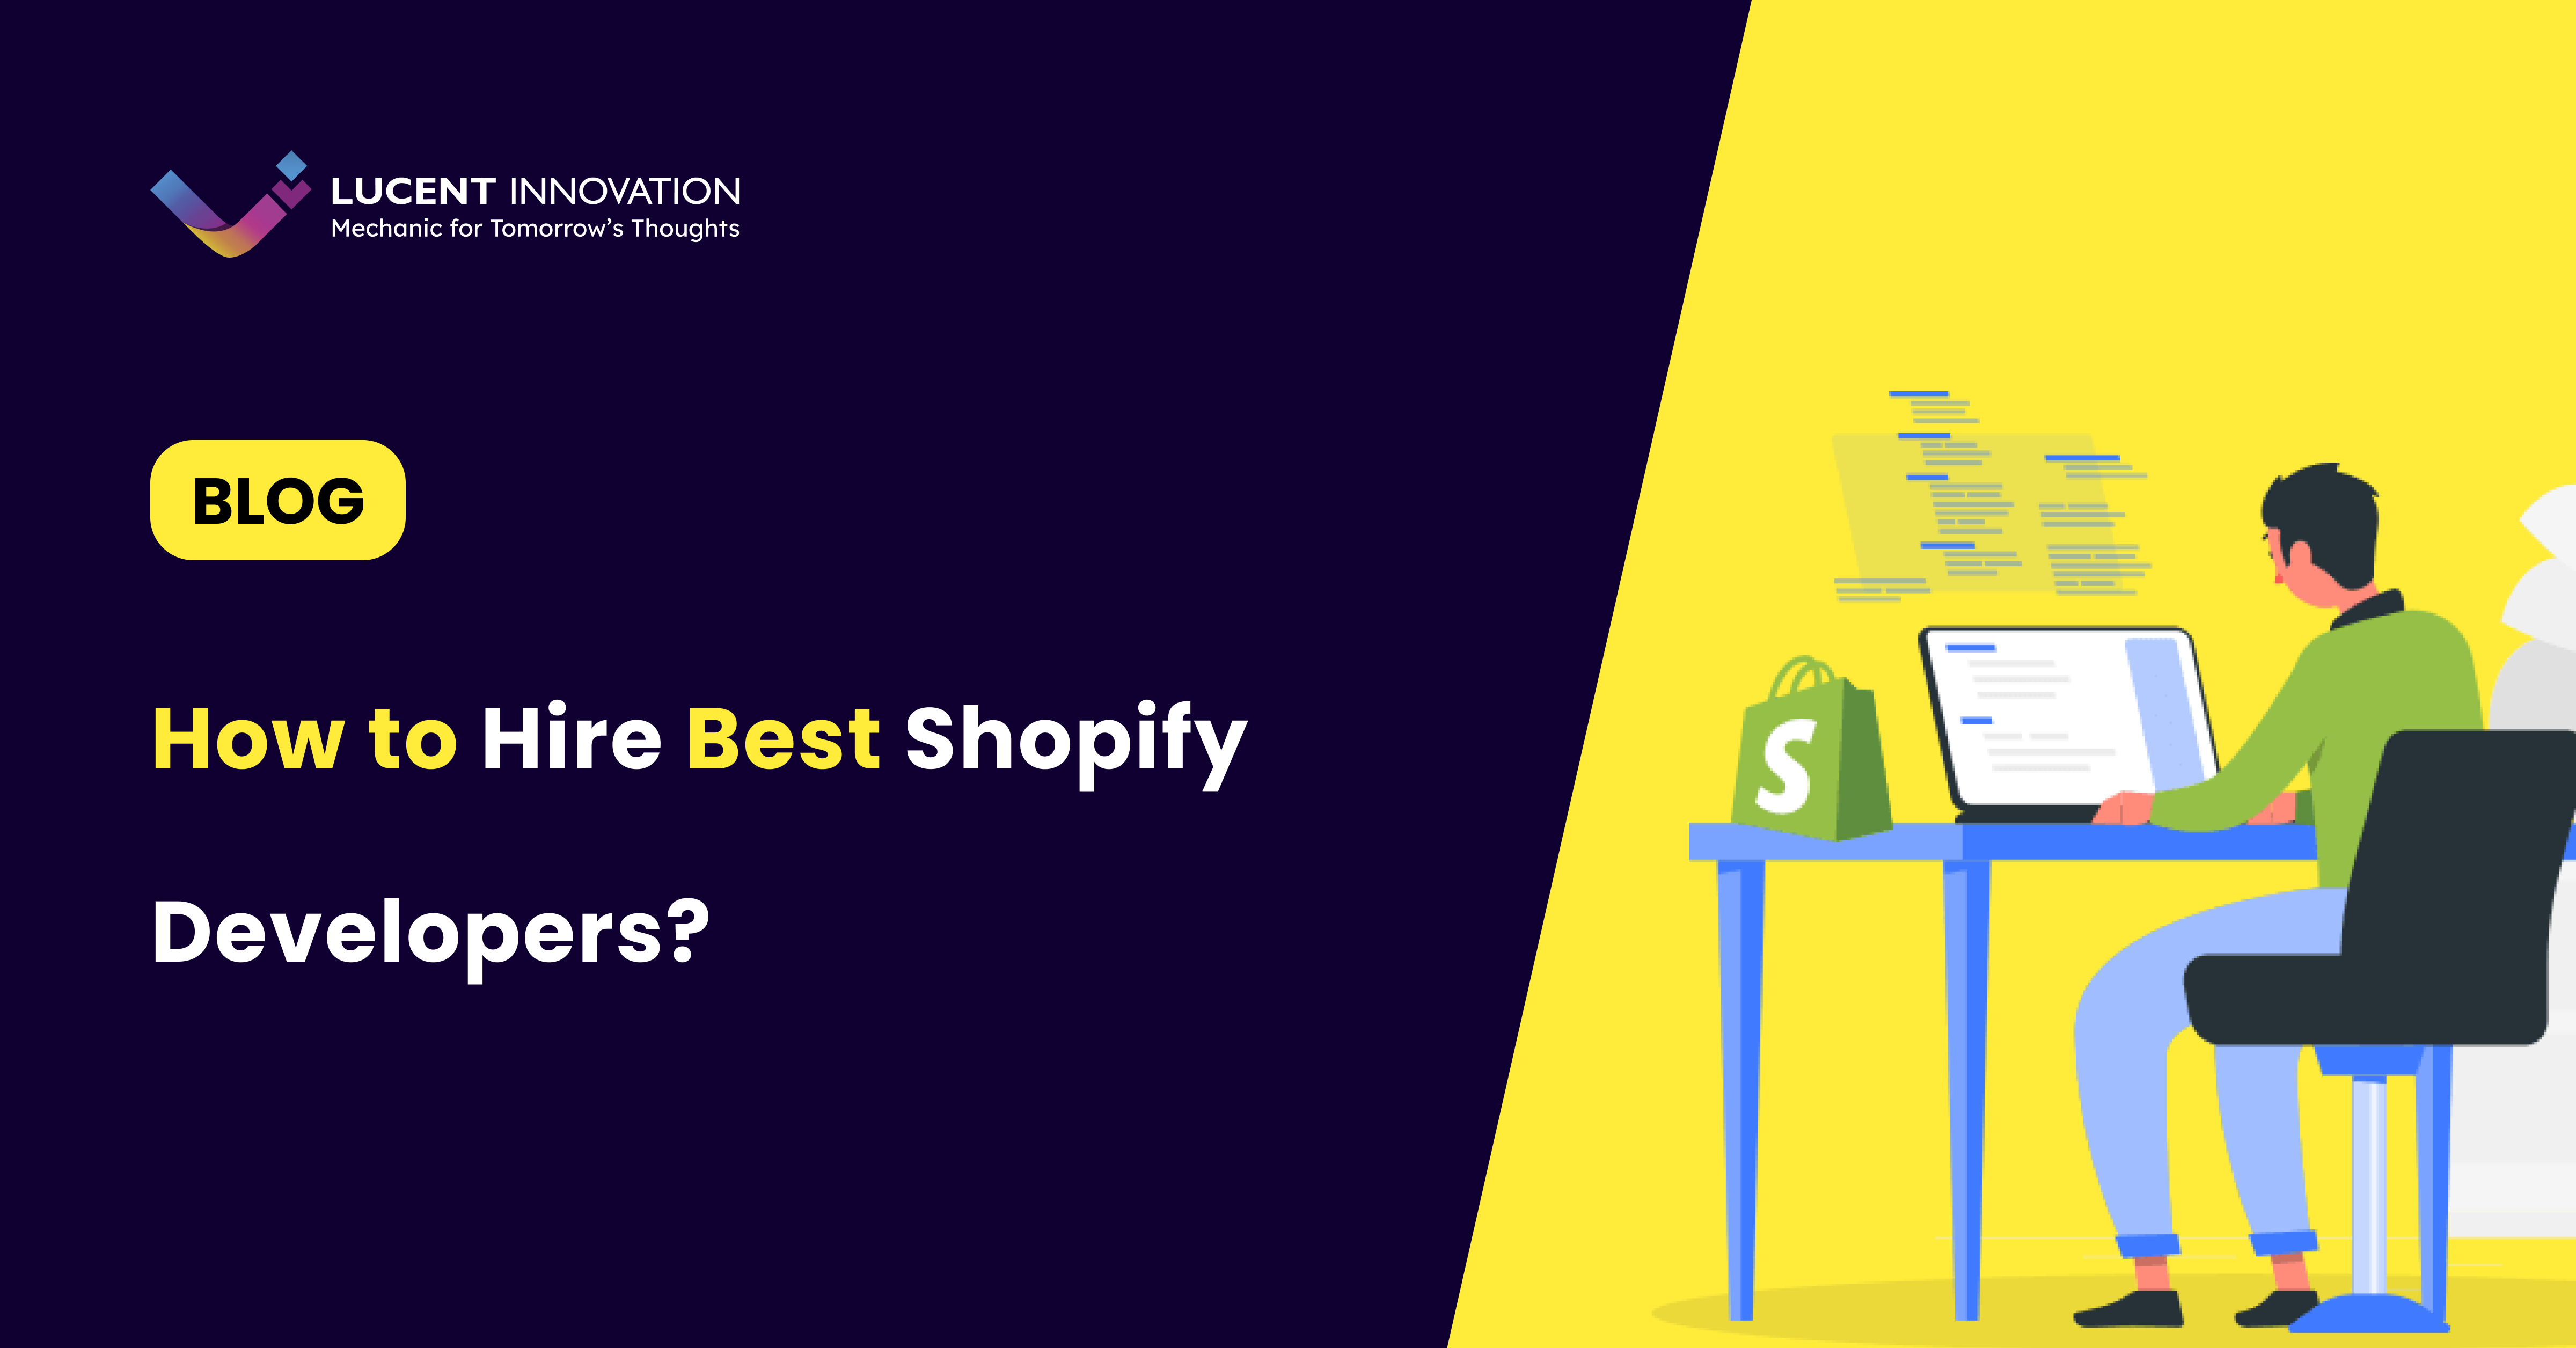 How to Hire the Best Shopify Developers?